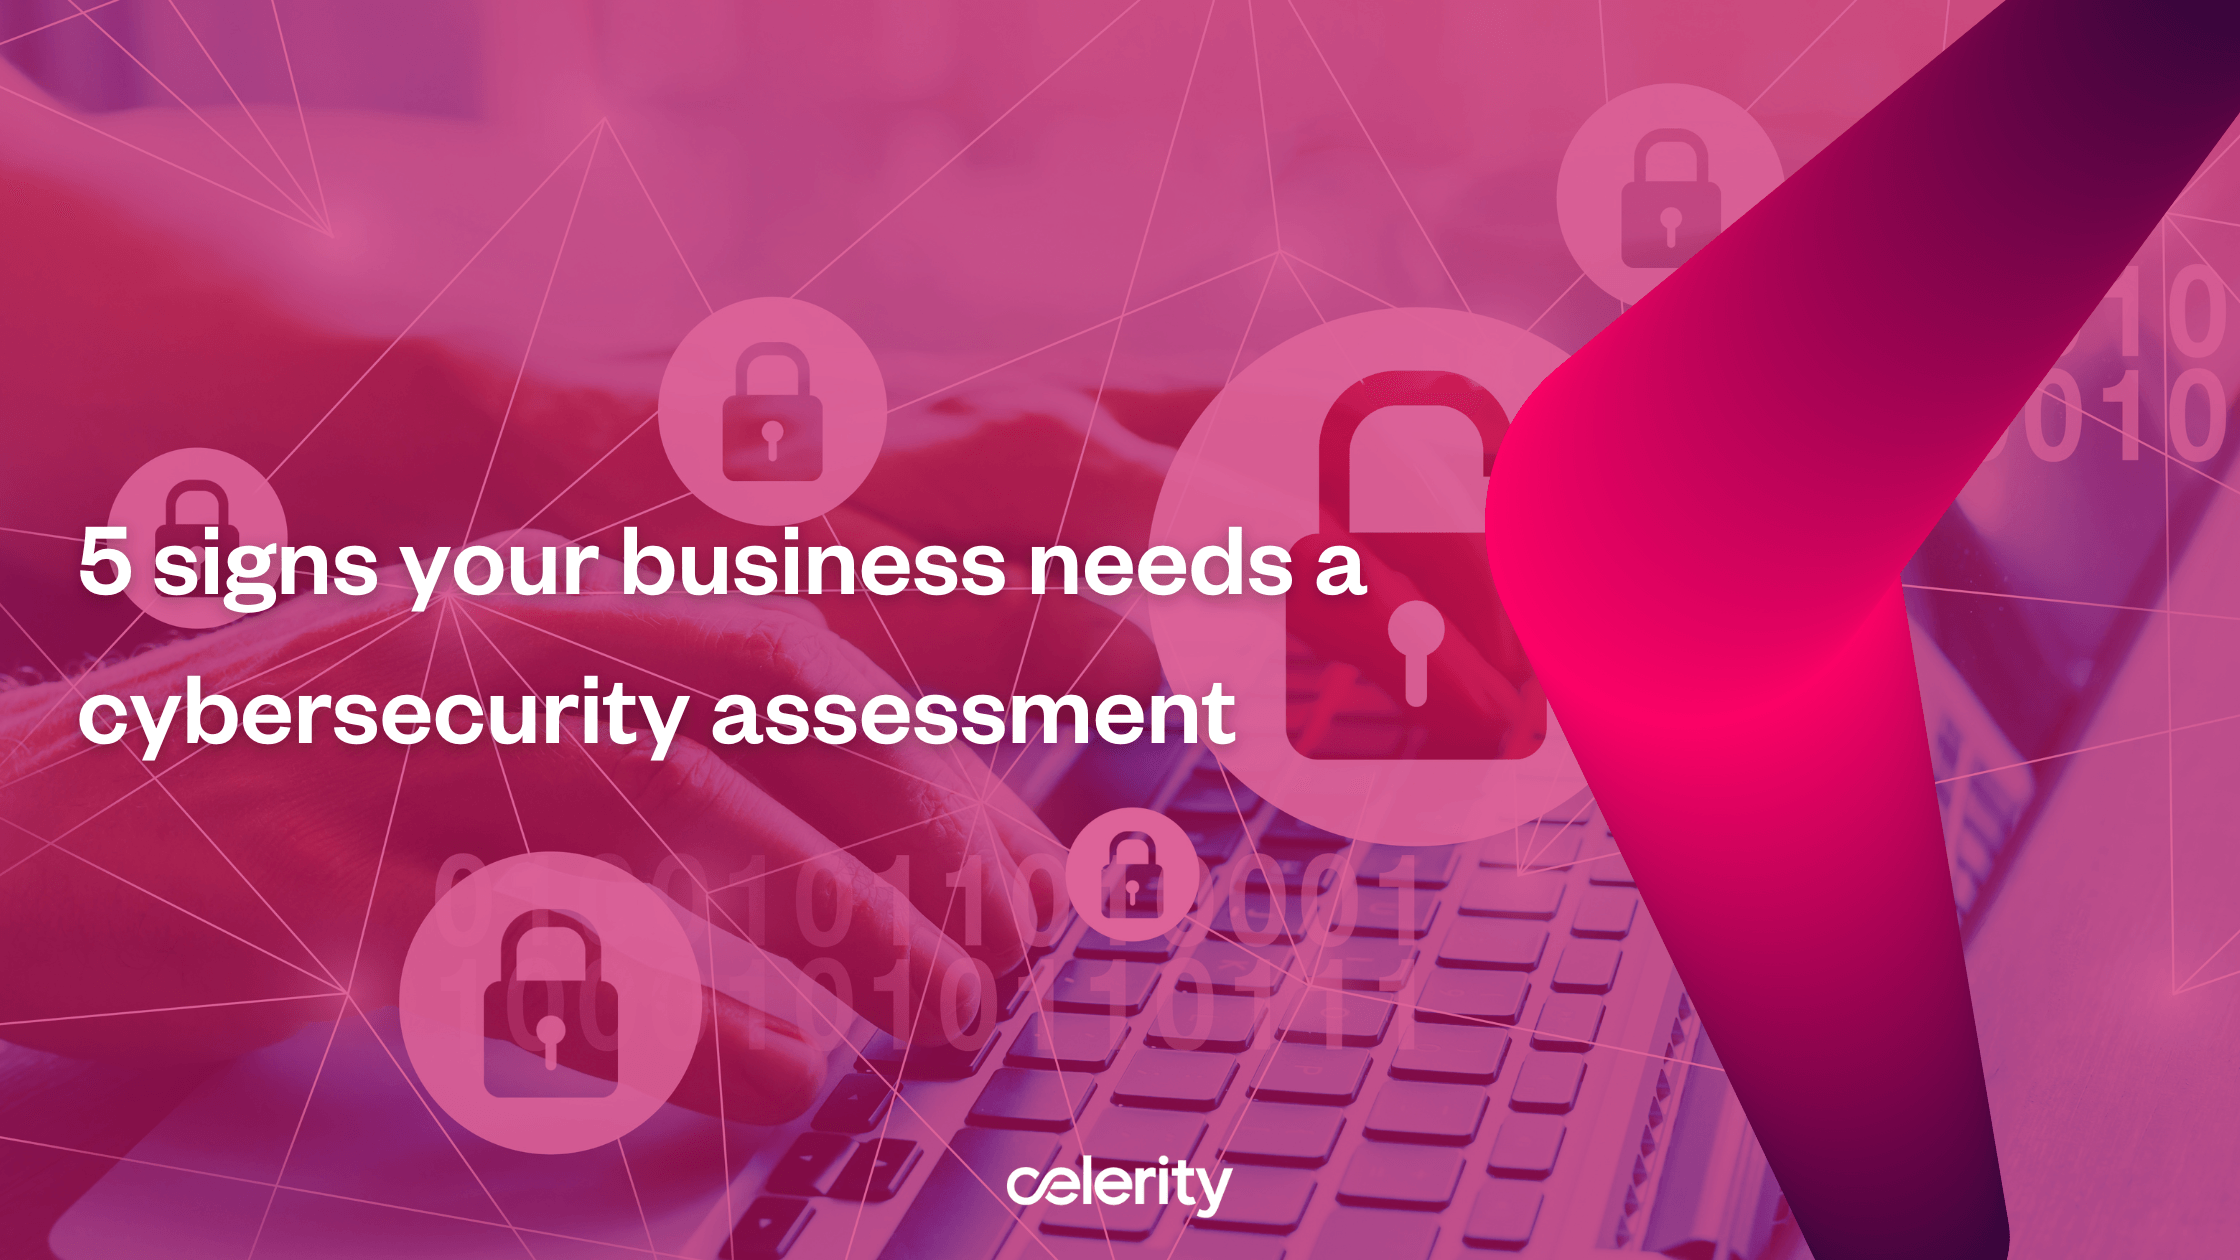 5 signs your business needs a cybersecurity assessment